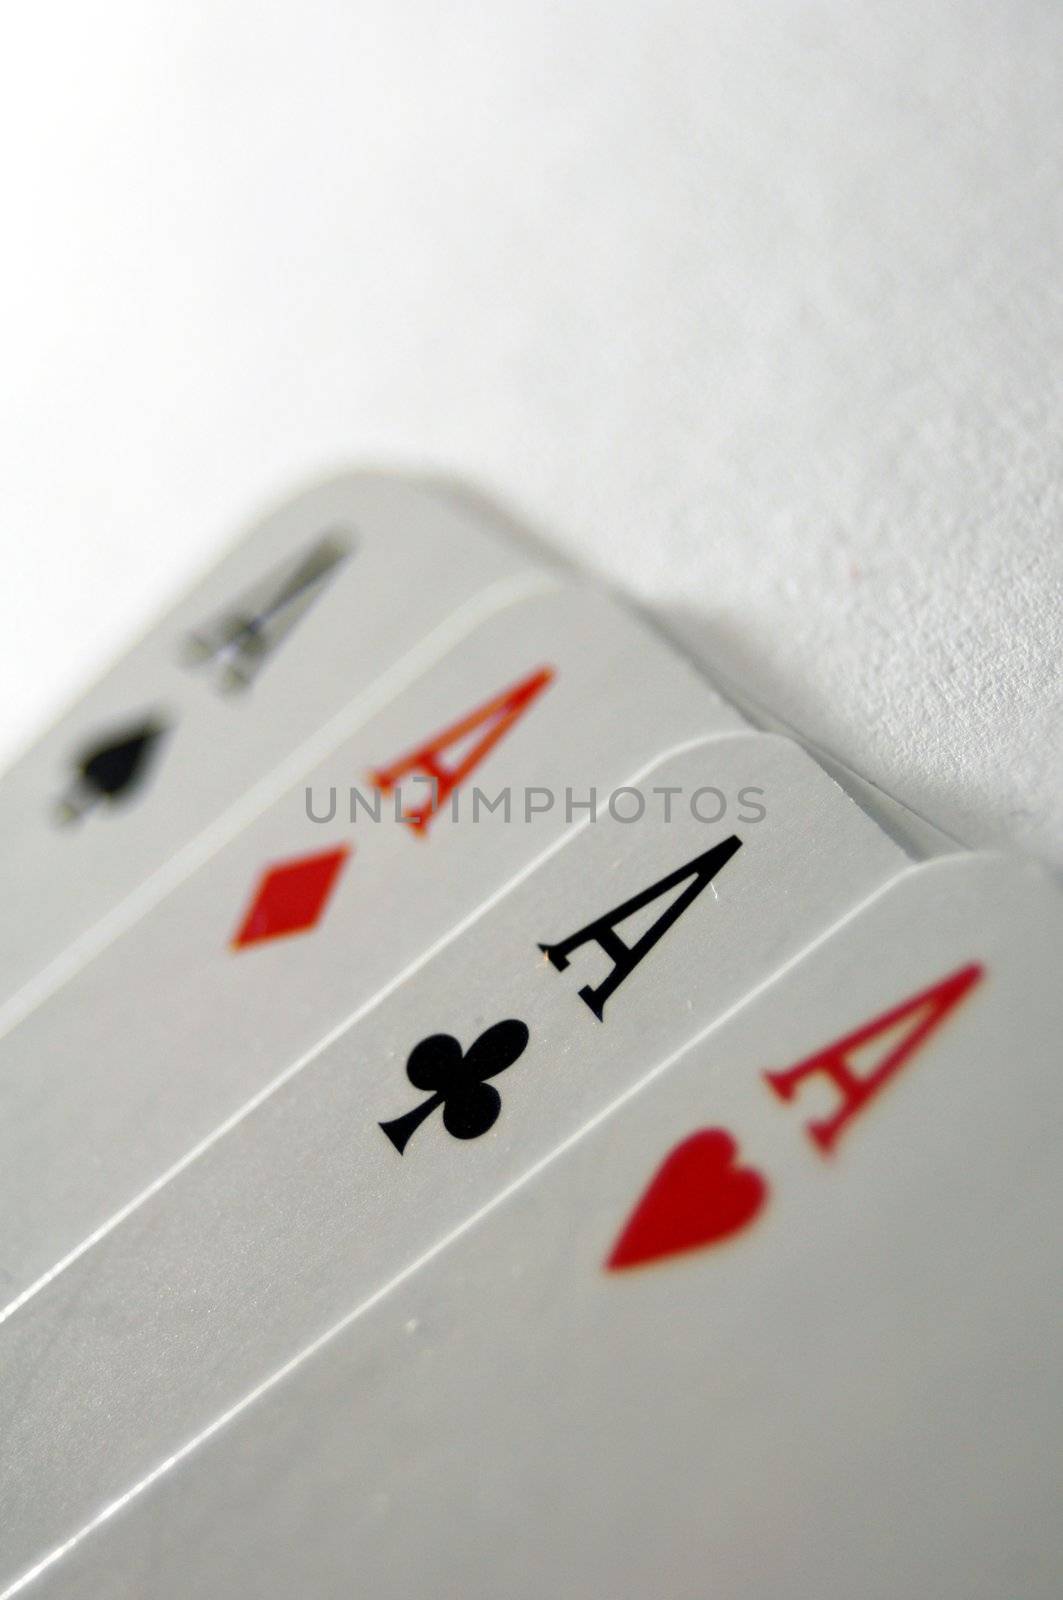 four aces on white showing winning or casino concept